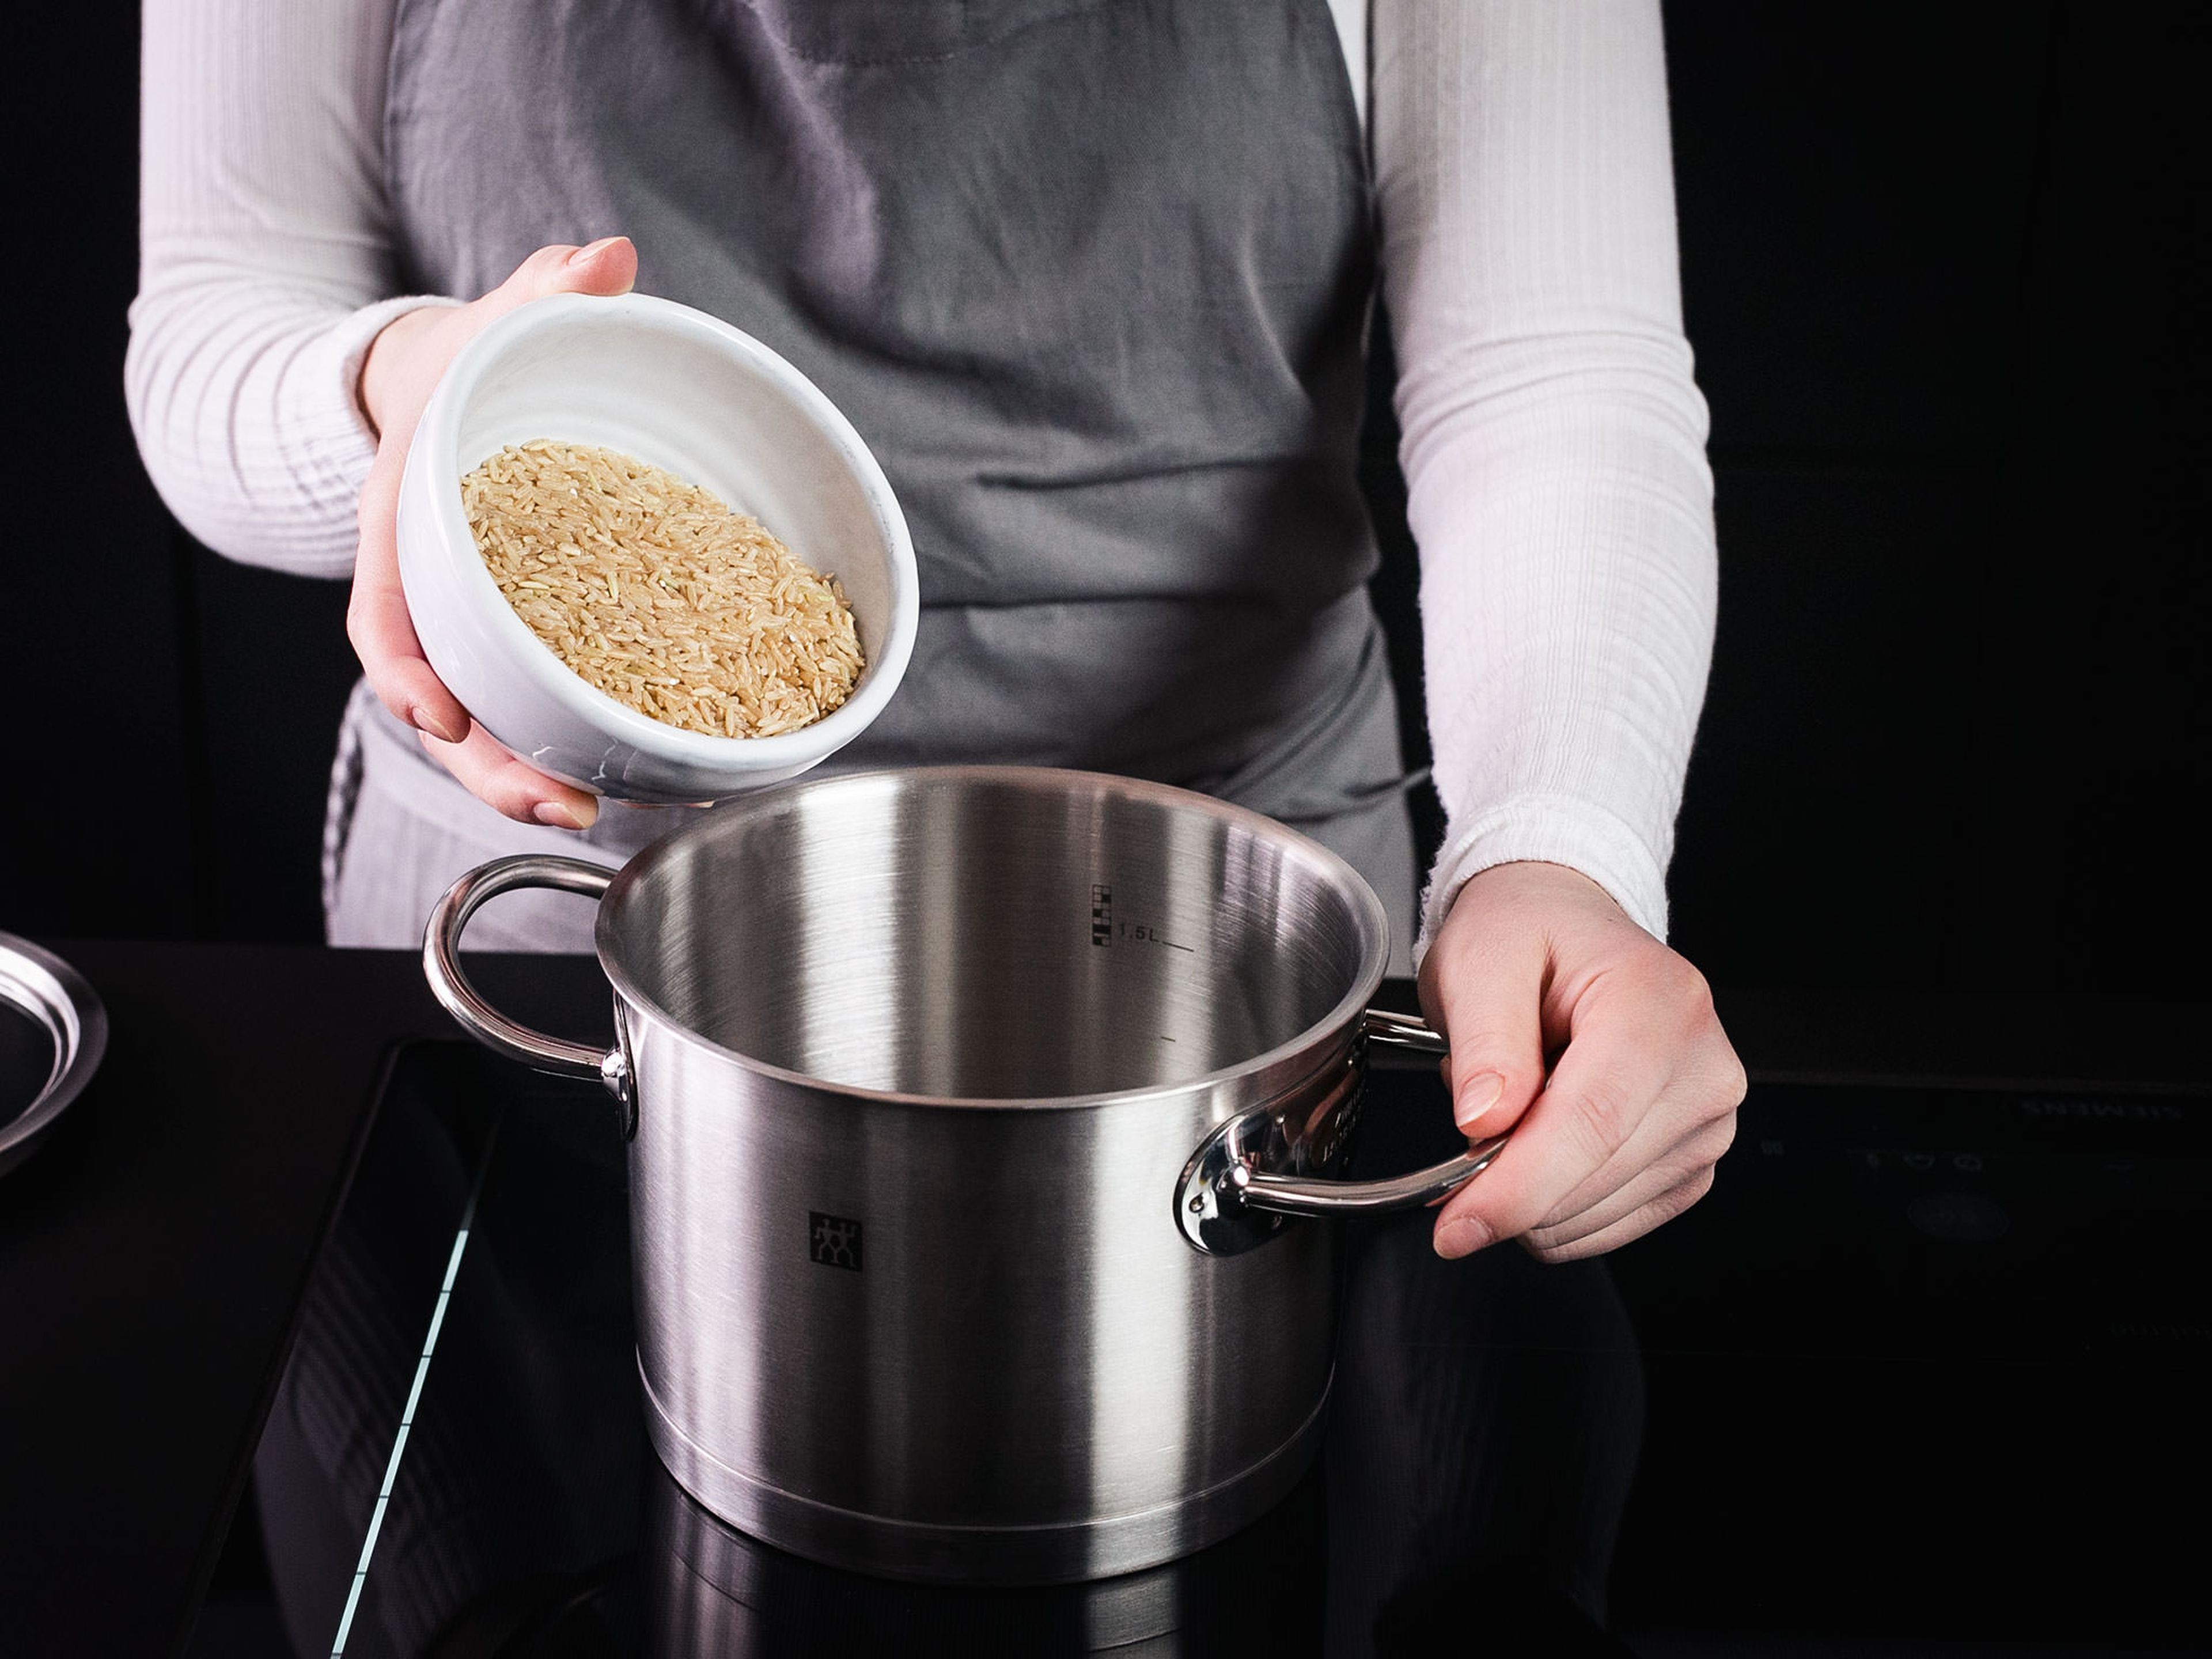 Add water and rice to a small pot. Bring to a boil, then cover, reduce heat to low, and let cook for approx. 15 min.